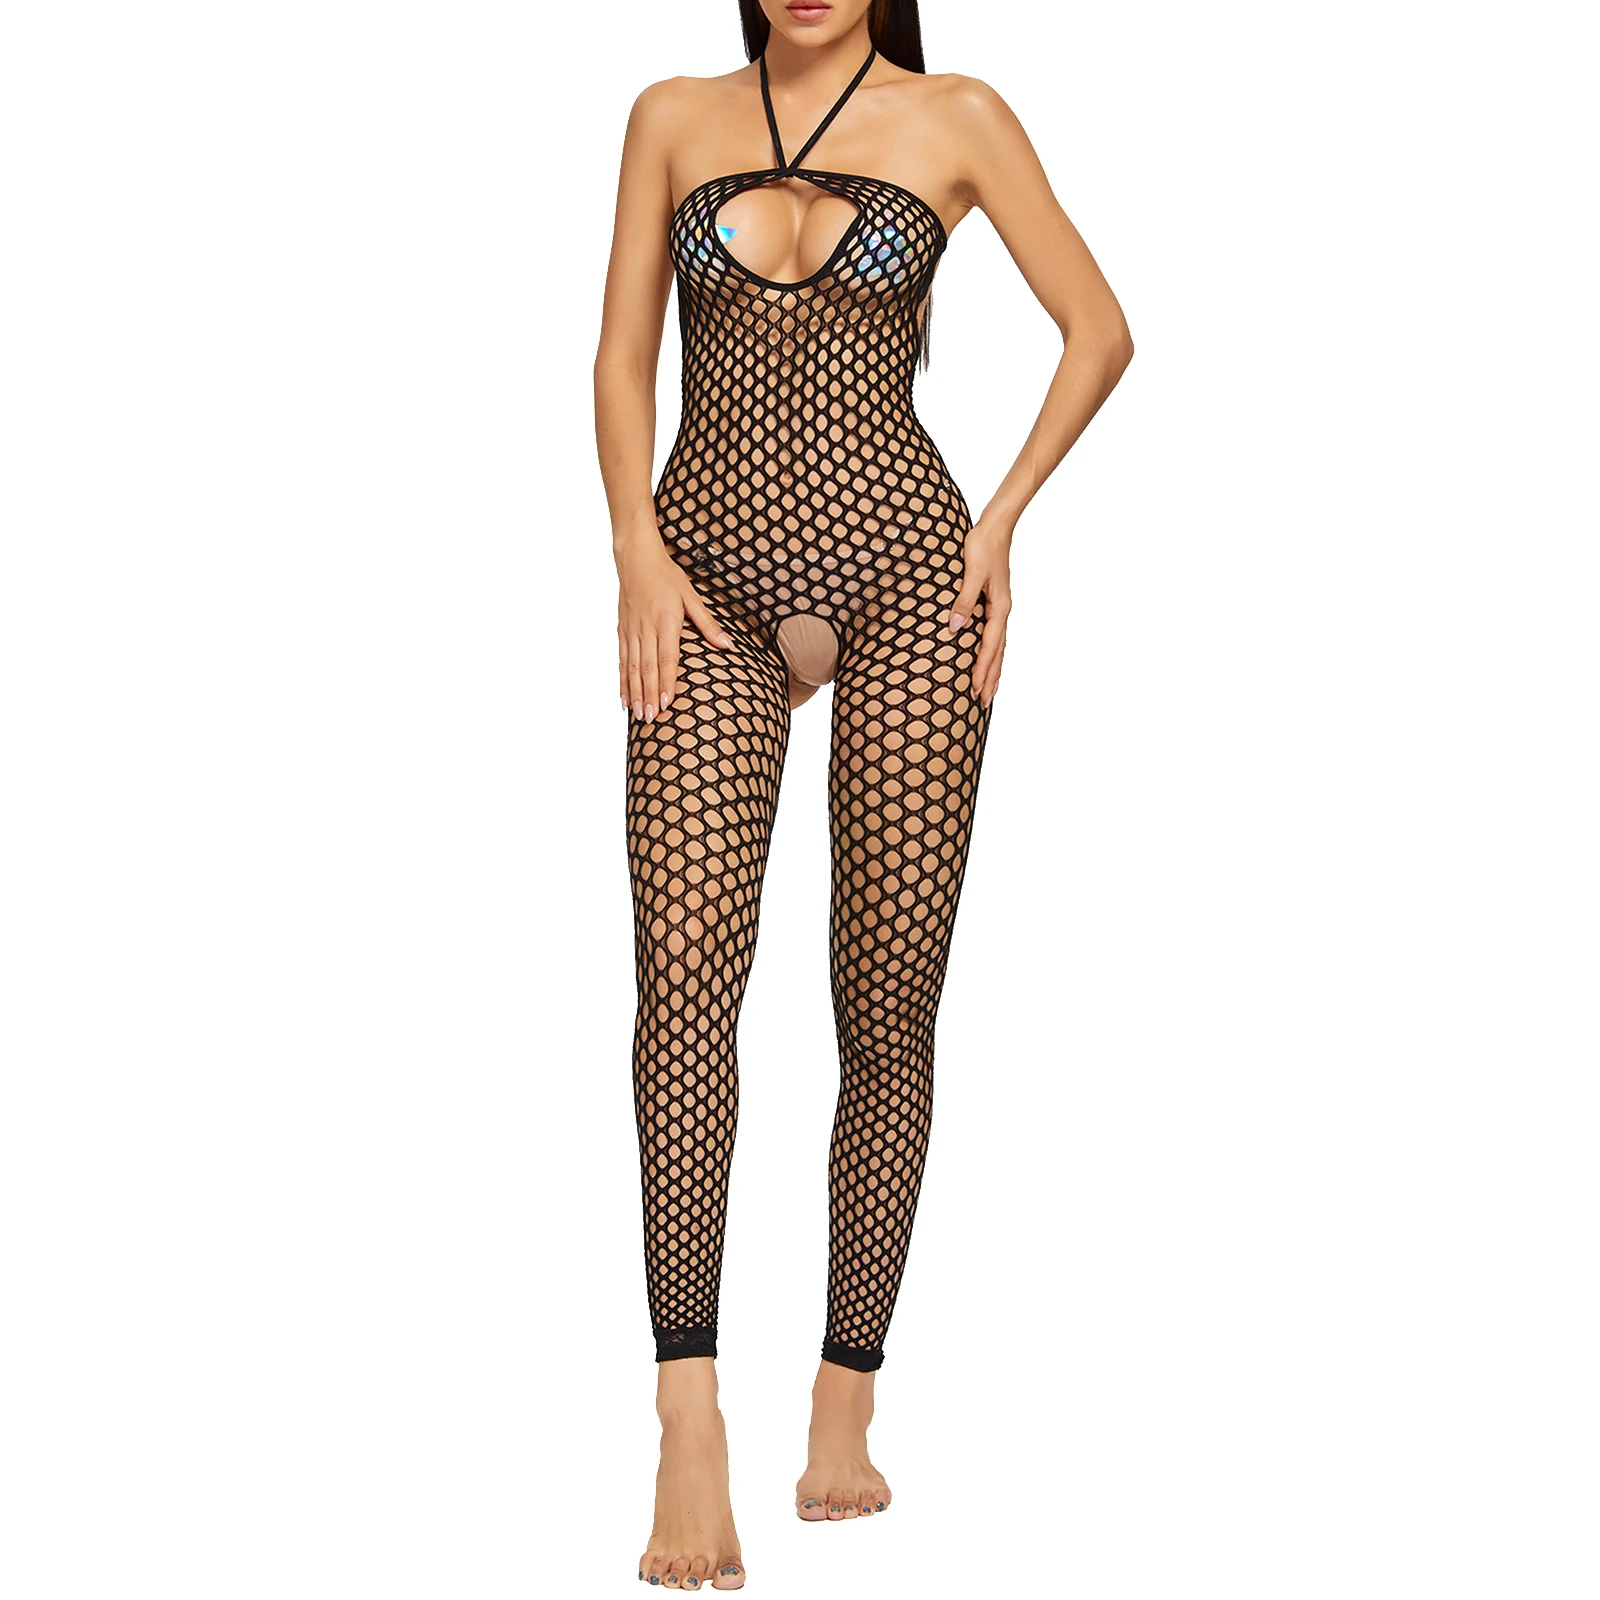 

Women Sexy Lingerie Hollow Out Fishnet Sleeveless Crotchless Bodysuit Nightwear Lingerie See-through Mesh Leotard Bodystocking